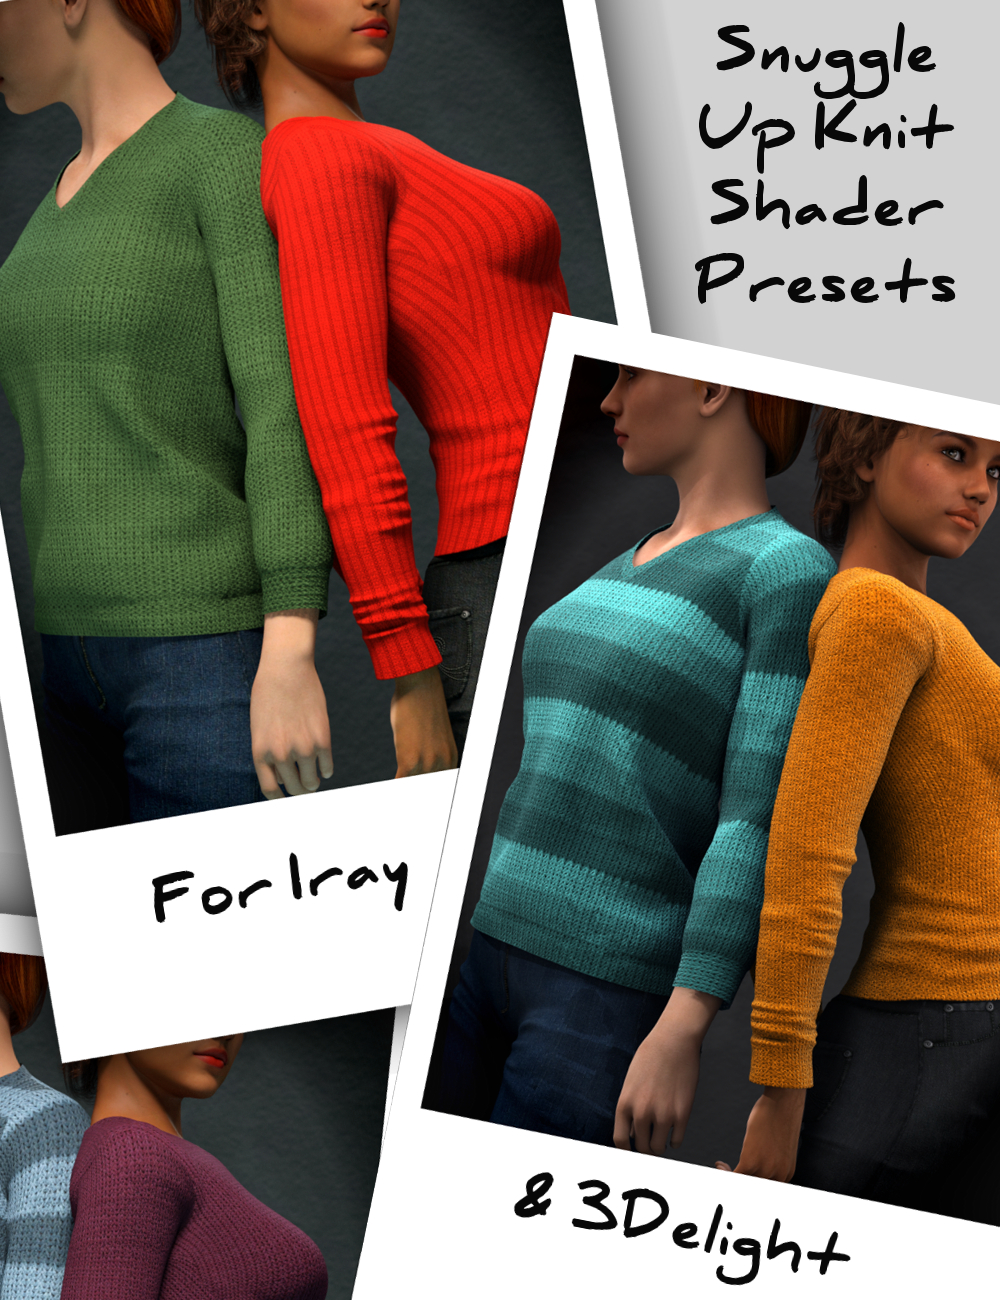 Snuggle Up Knits for Iray and 3Delight - Shader Presets by: Inkara, 3D Models by Daz 3D